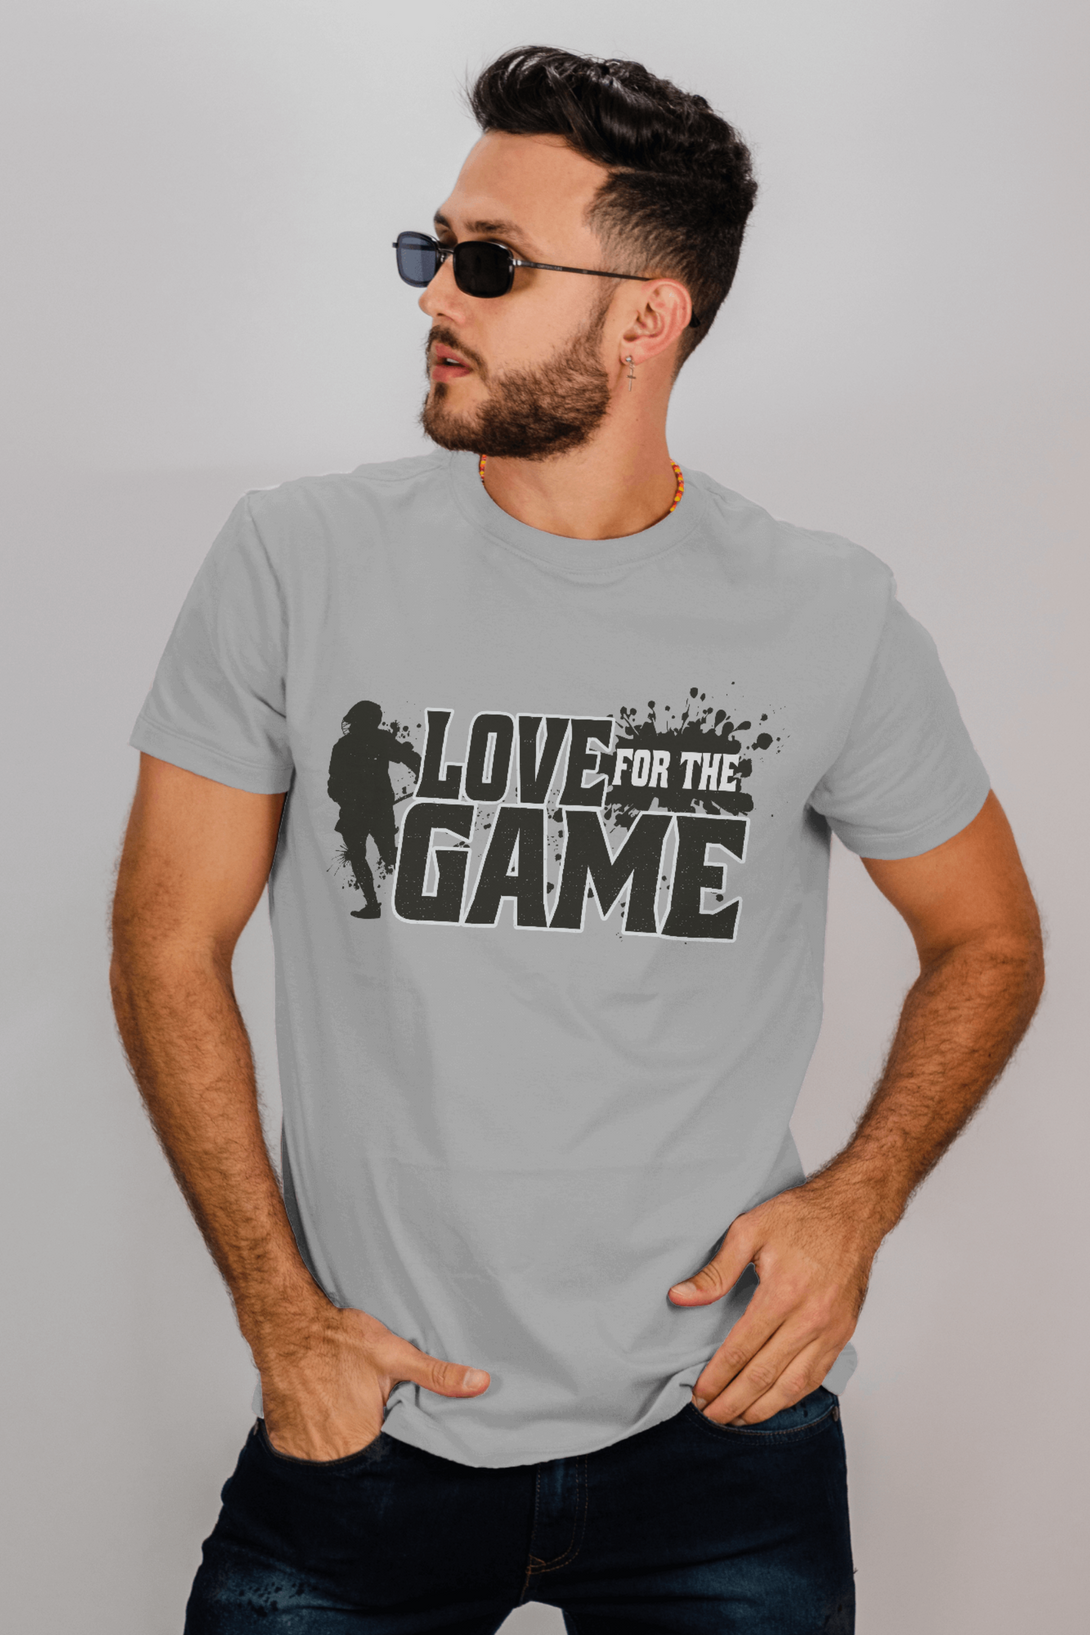 Love For The Game Printed T-Shirt For Men - WowWaves - 4